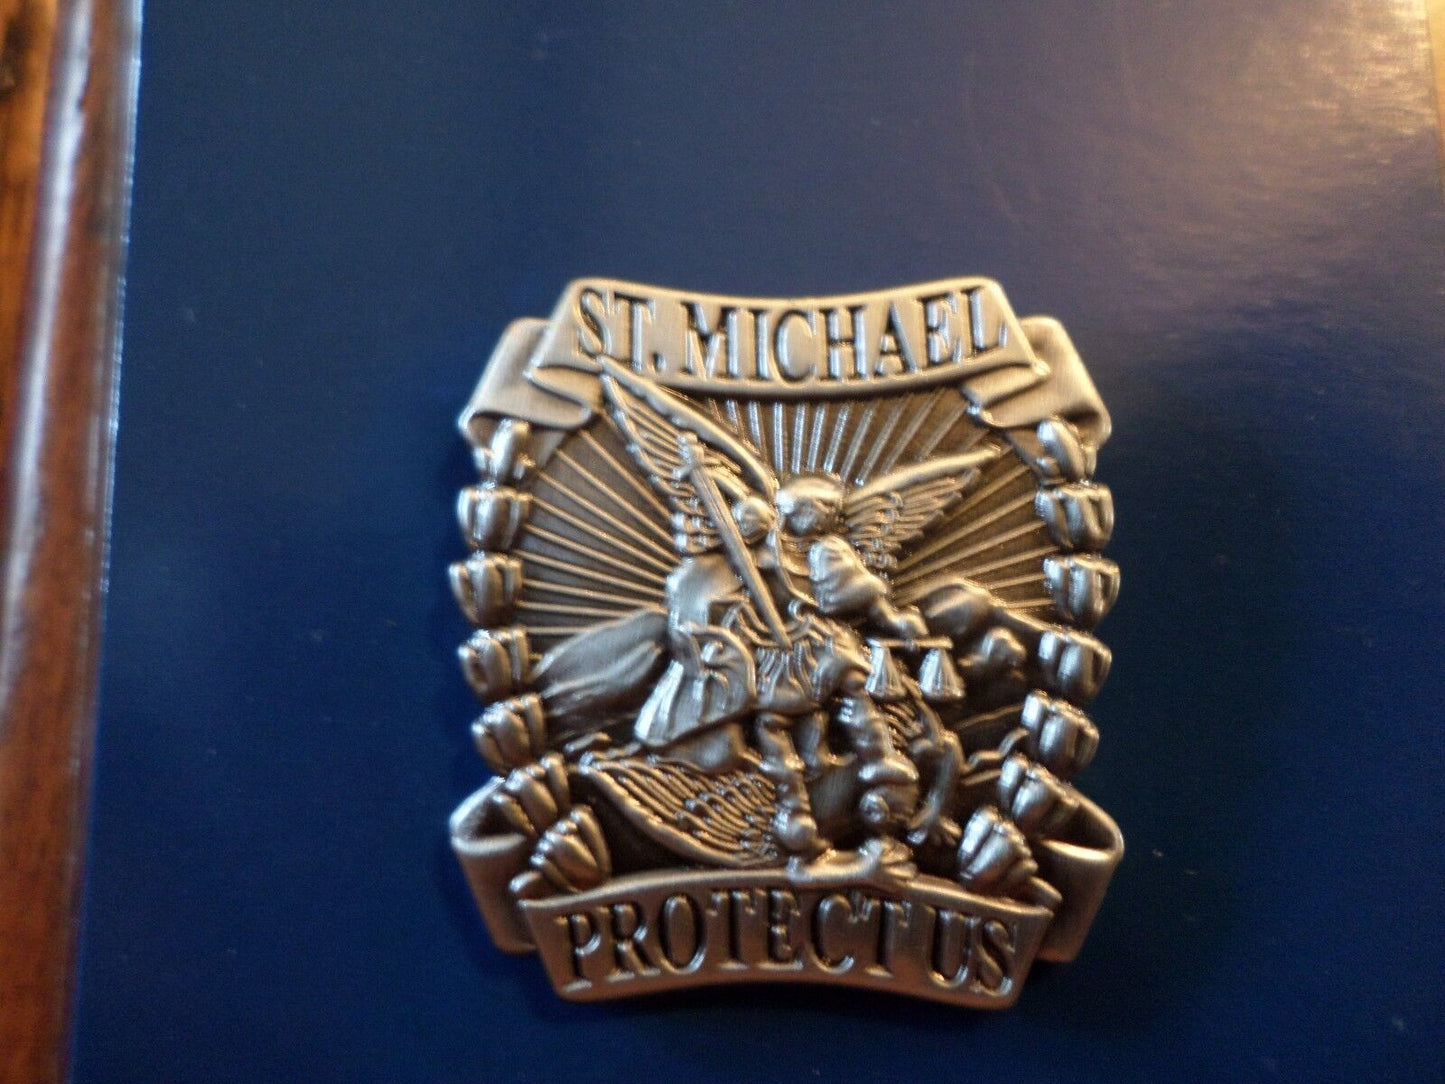 ST. MICHAEL PROTECT US SPIRITUAL RELIGIOUS HAT/LAPEL PIN NEW IN ORIGINAL PACKAGE